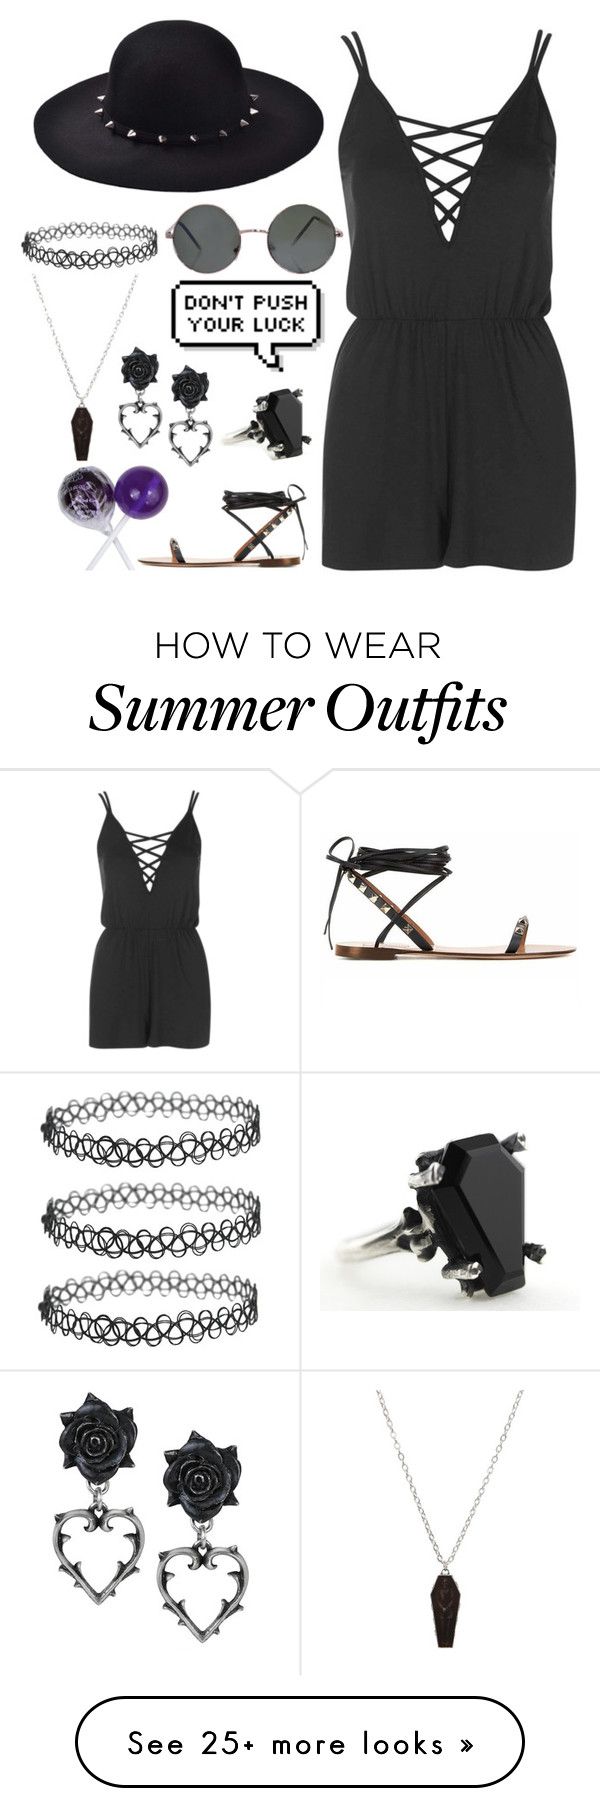 "Random outfit for summer i guess" by cherry-demon on Polyvore featuri...